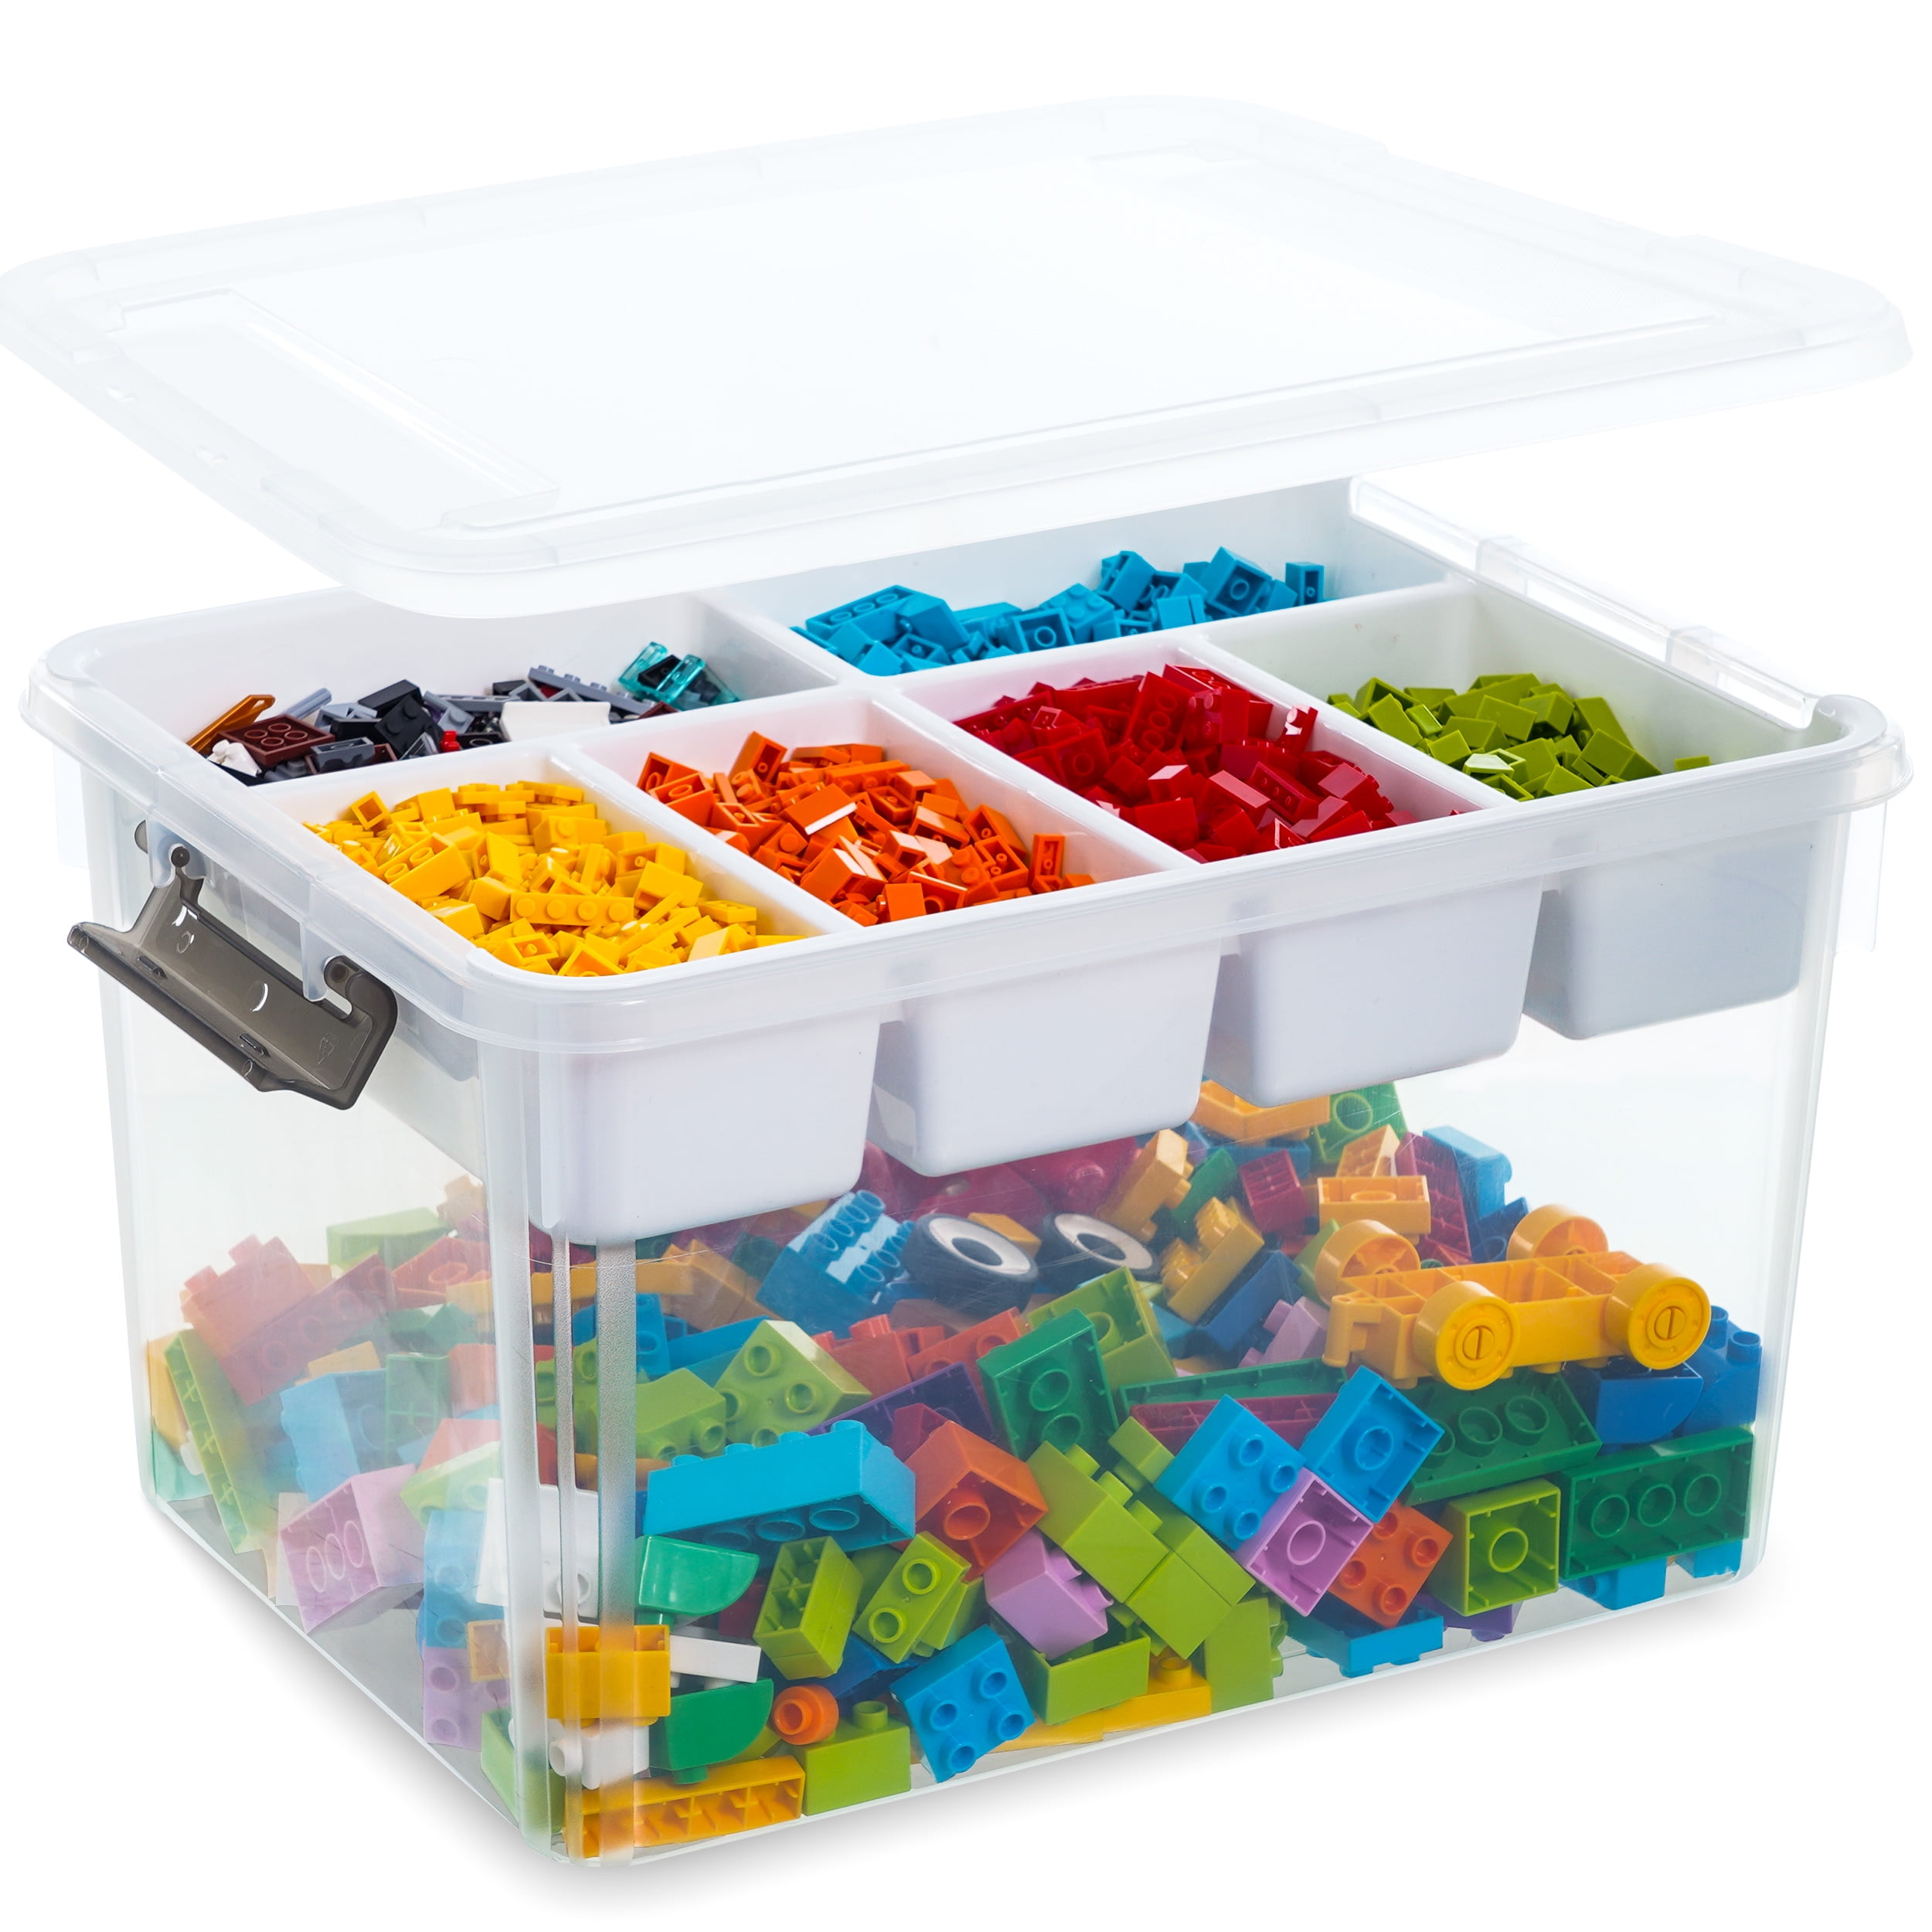  Citylife 8 Packs Plastic Bead Organizers 0.53 QT Clear Storage  Containers with Lids for Craft Storage Small Storage Box, 5.28 x 3.86 x  2.36 Inches : Arts, Crafts & Sewing